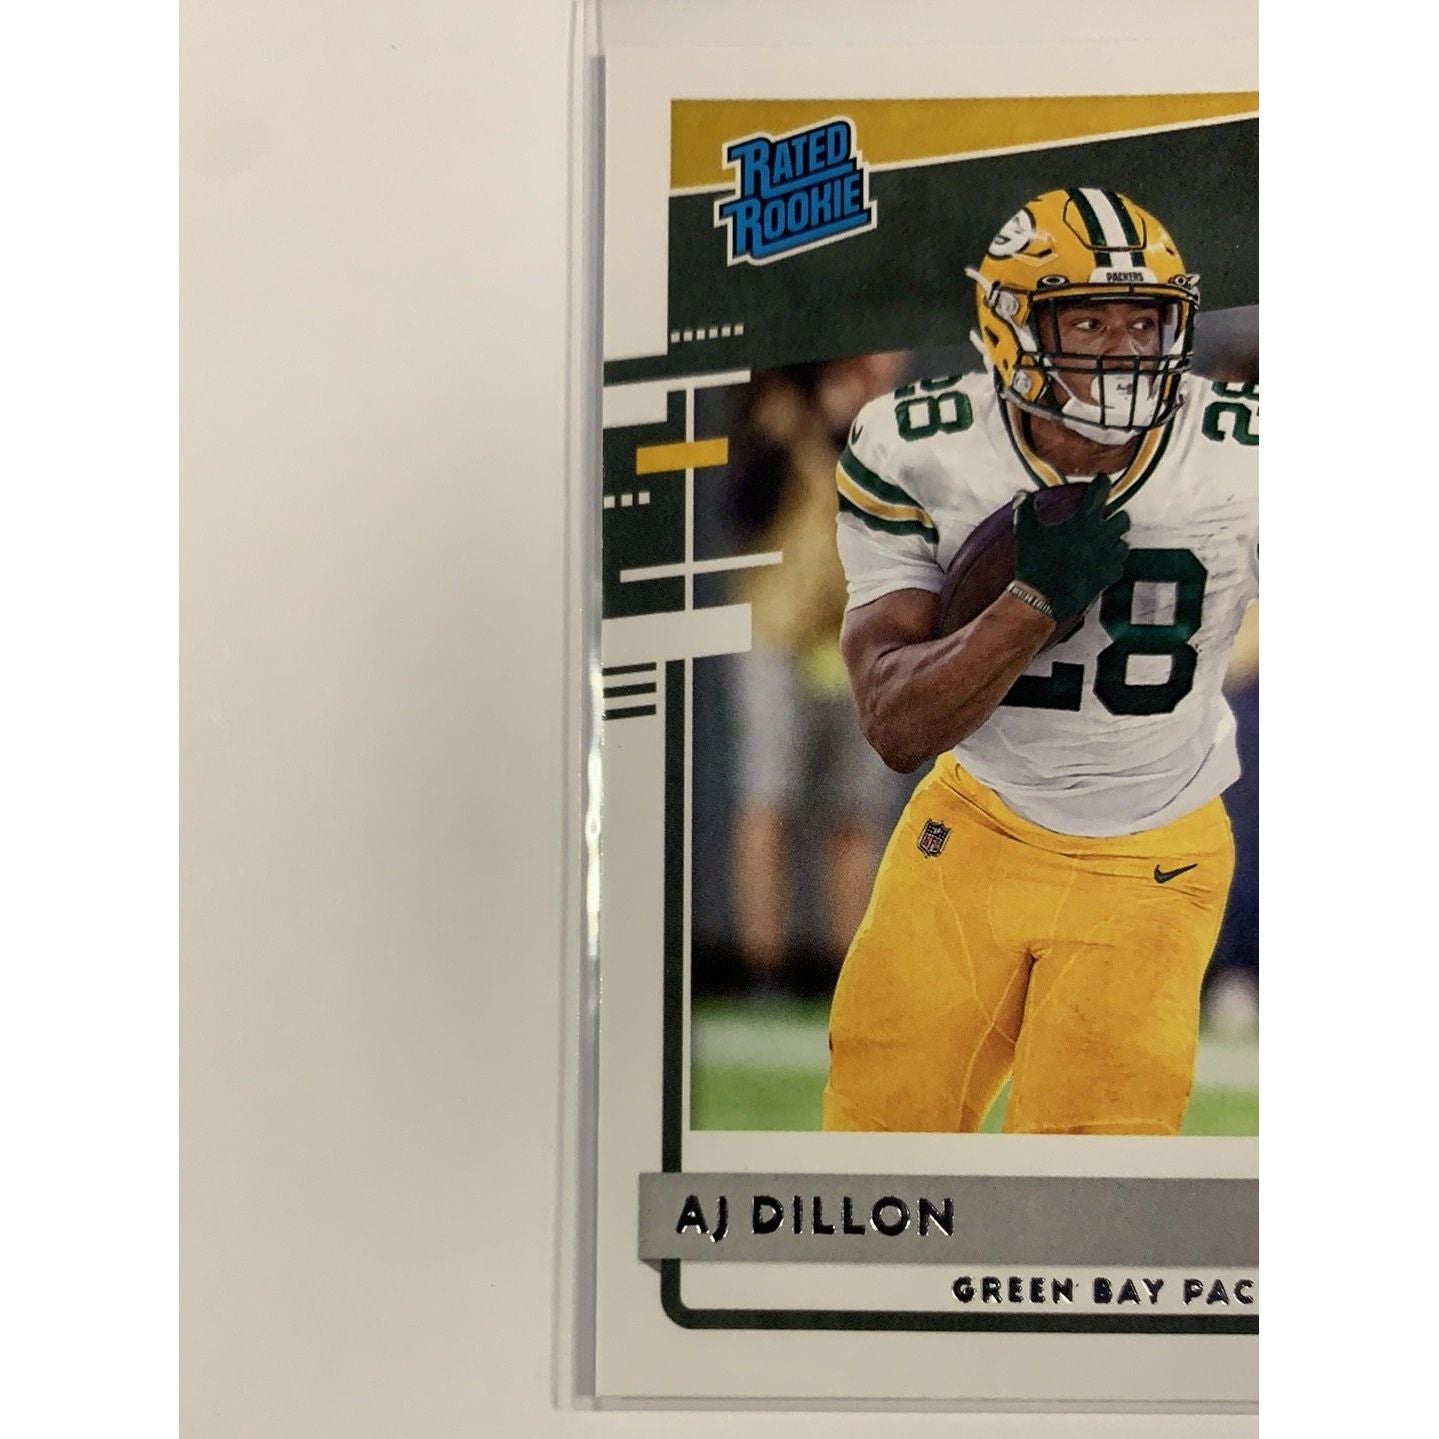  2020 Donruss Aj Dillon Rated Rookie  Local Legends Cards & Collectibles